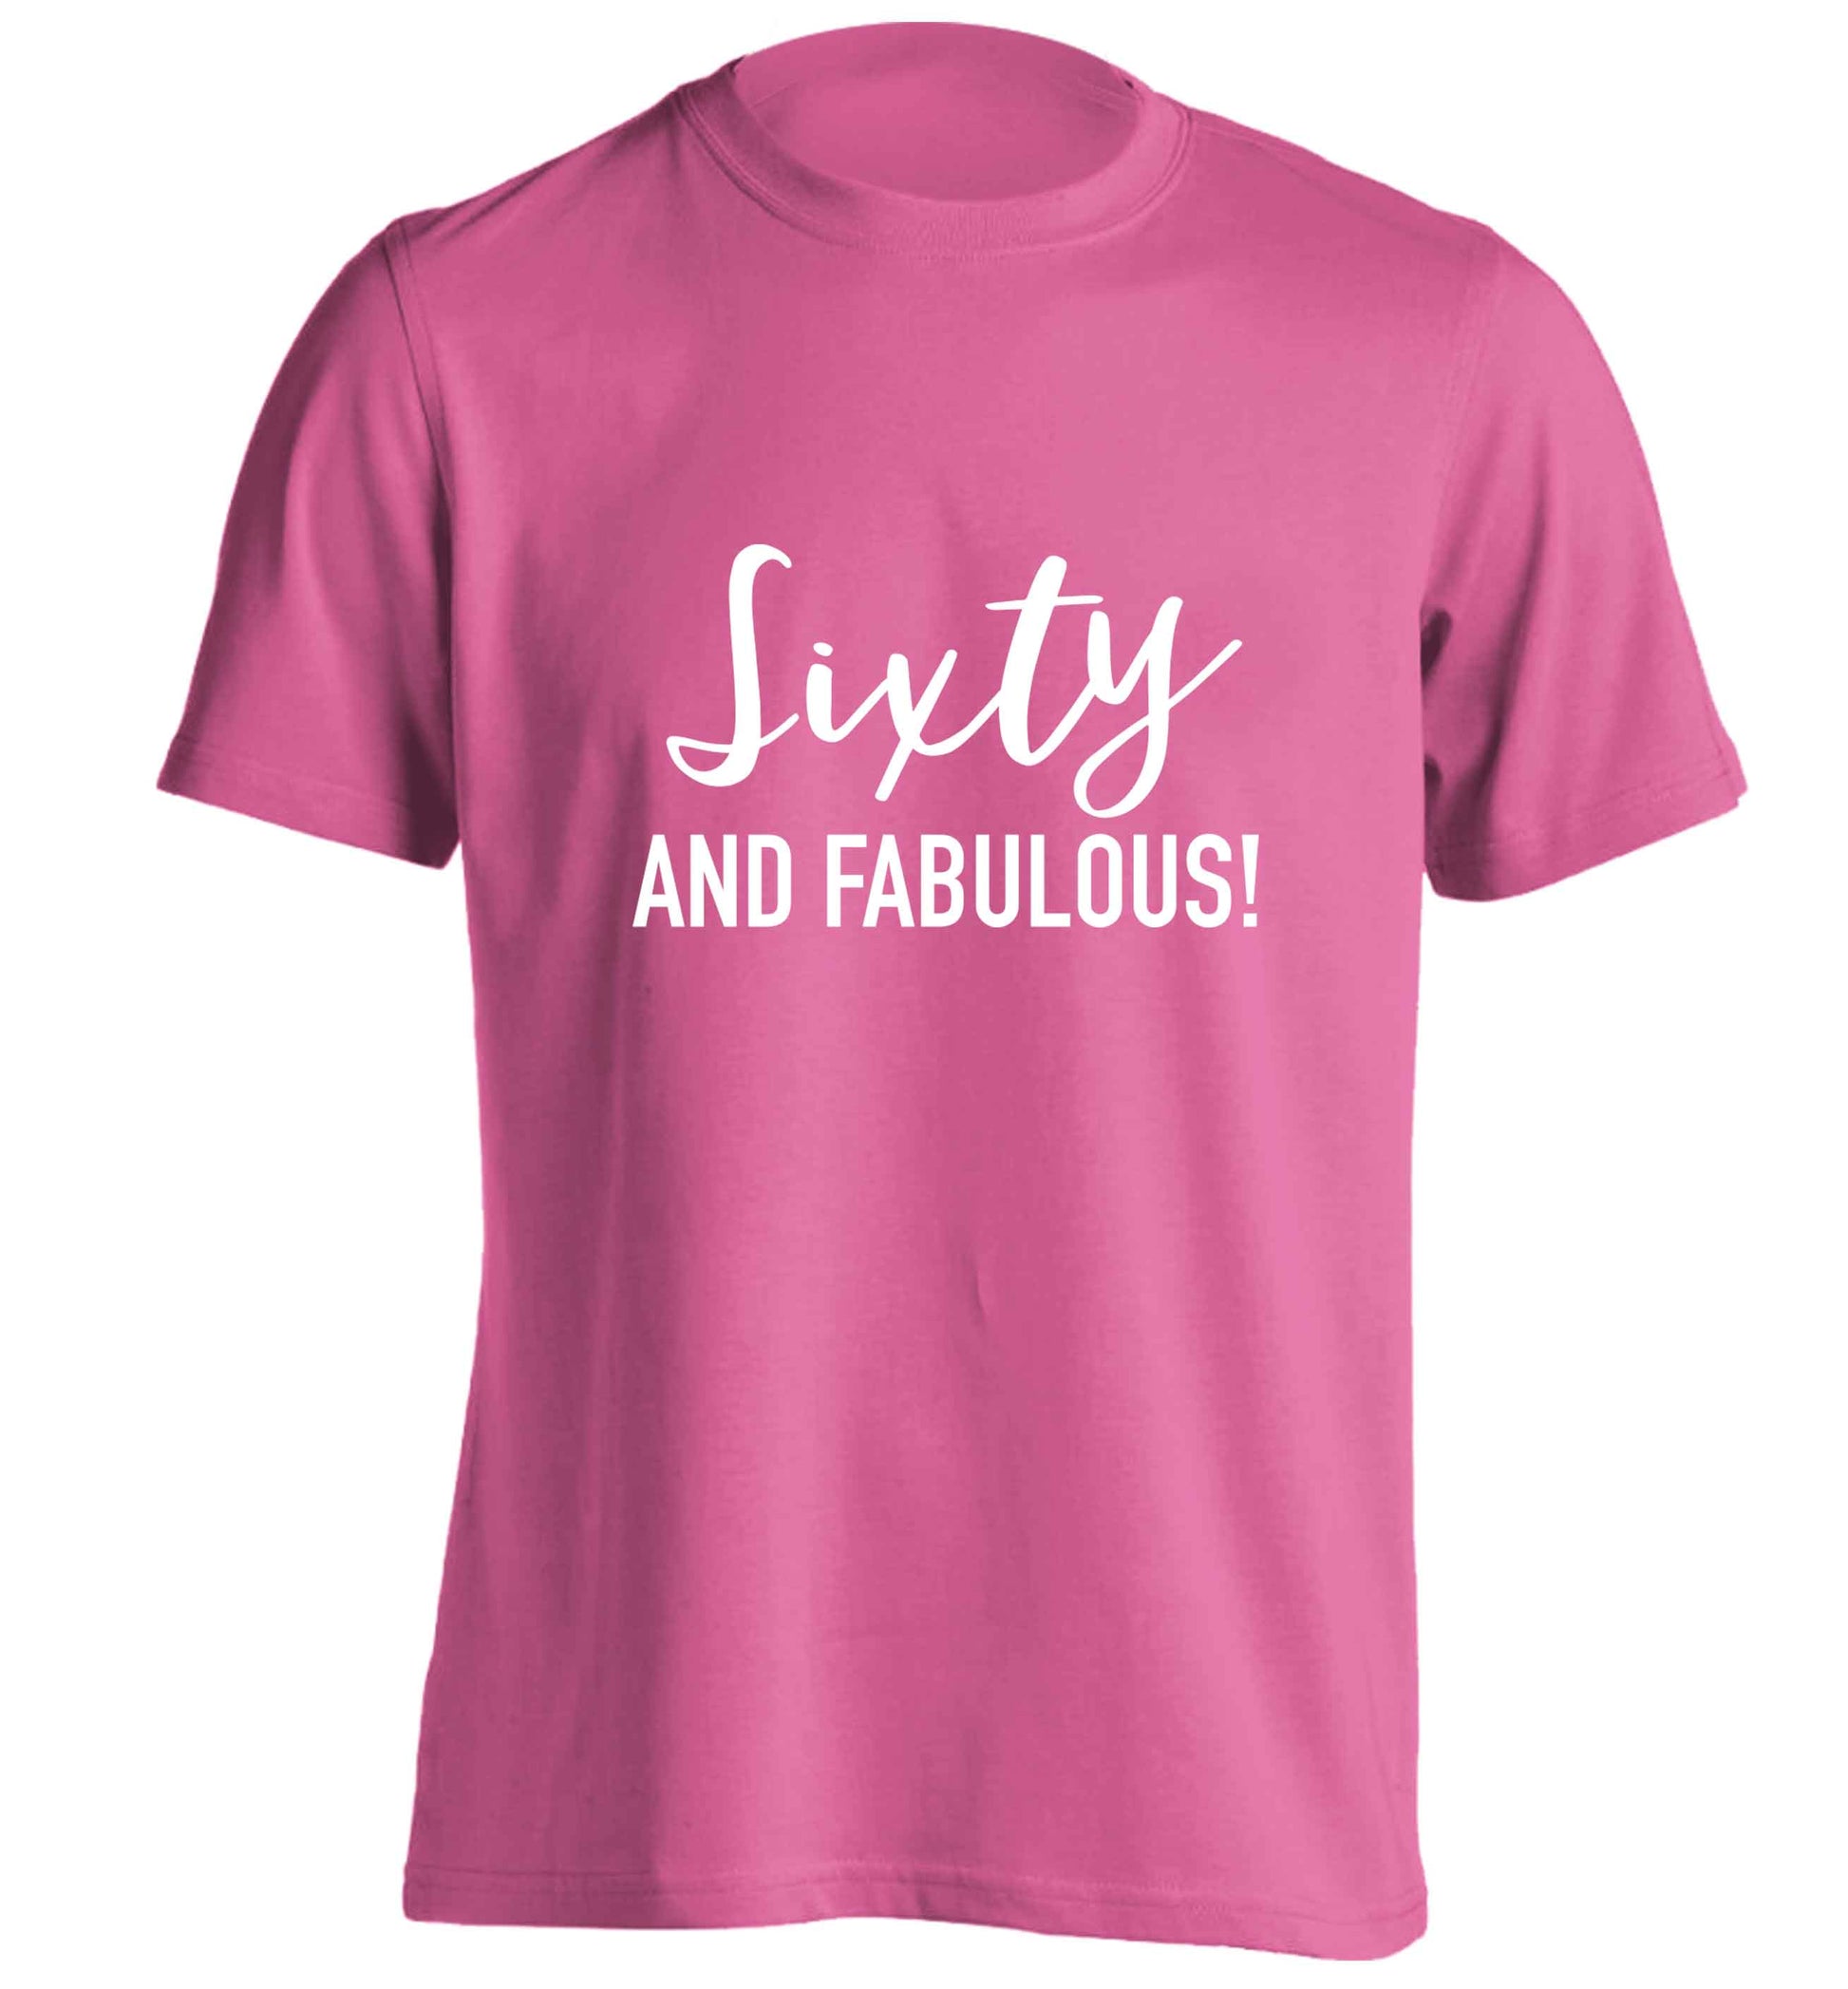 Sixty and fabulous adults unisex pink Tshirt 2XL